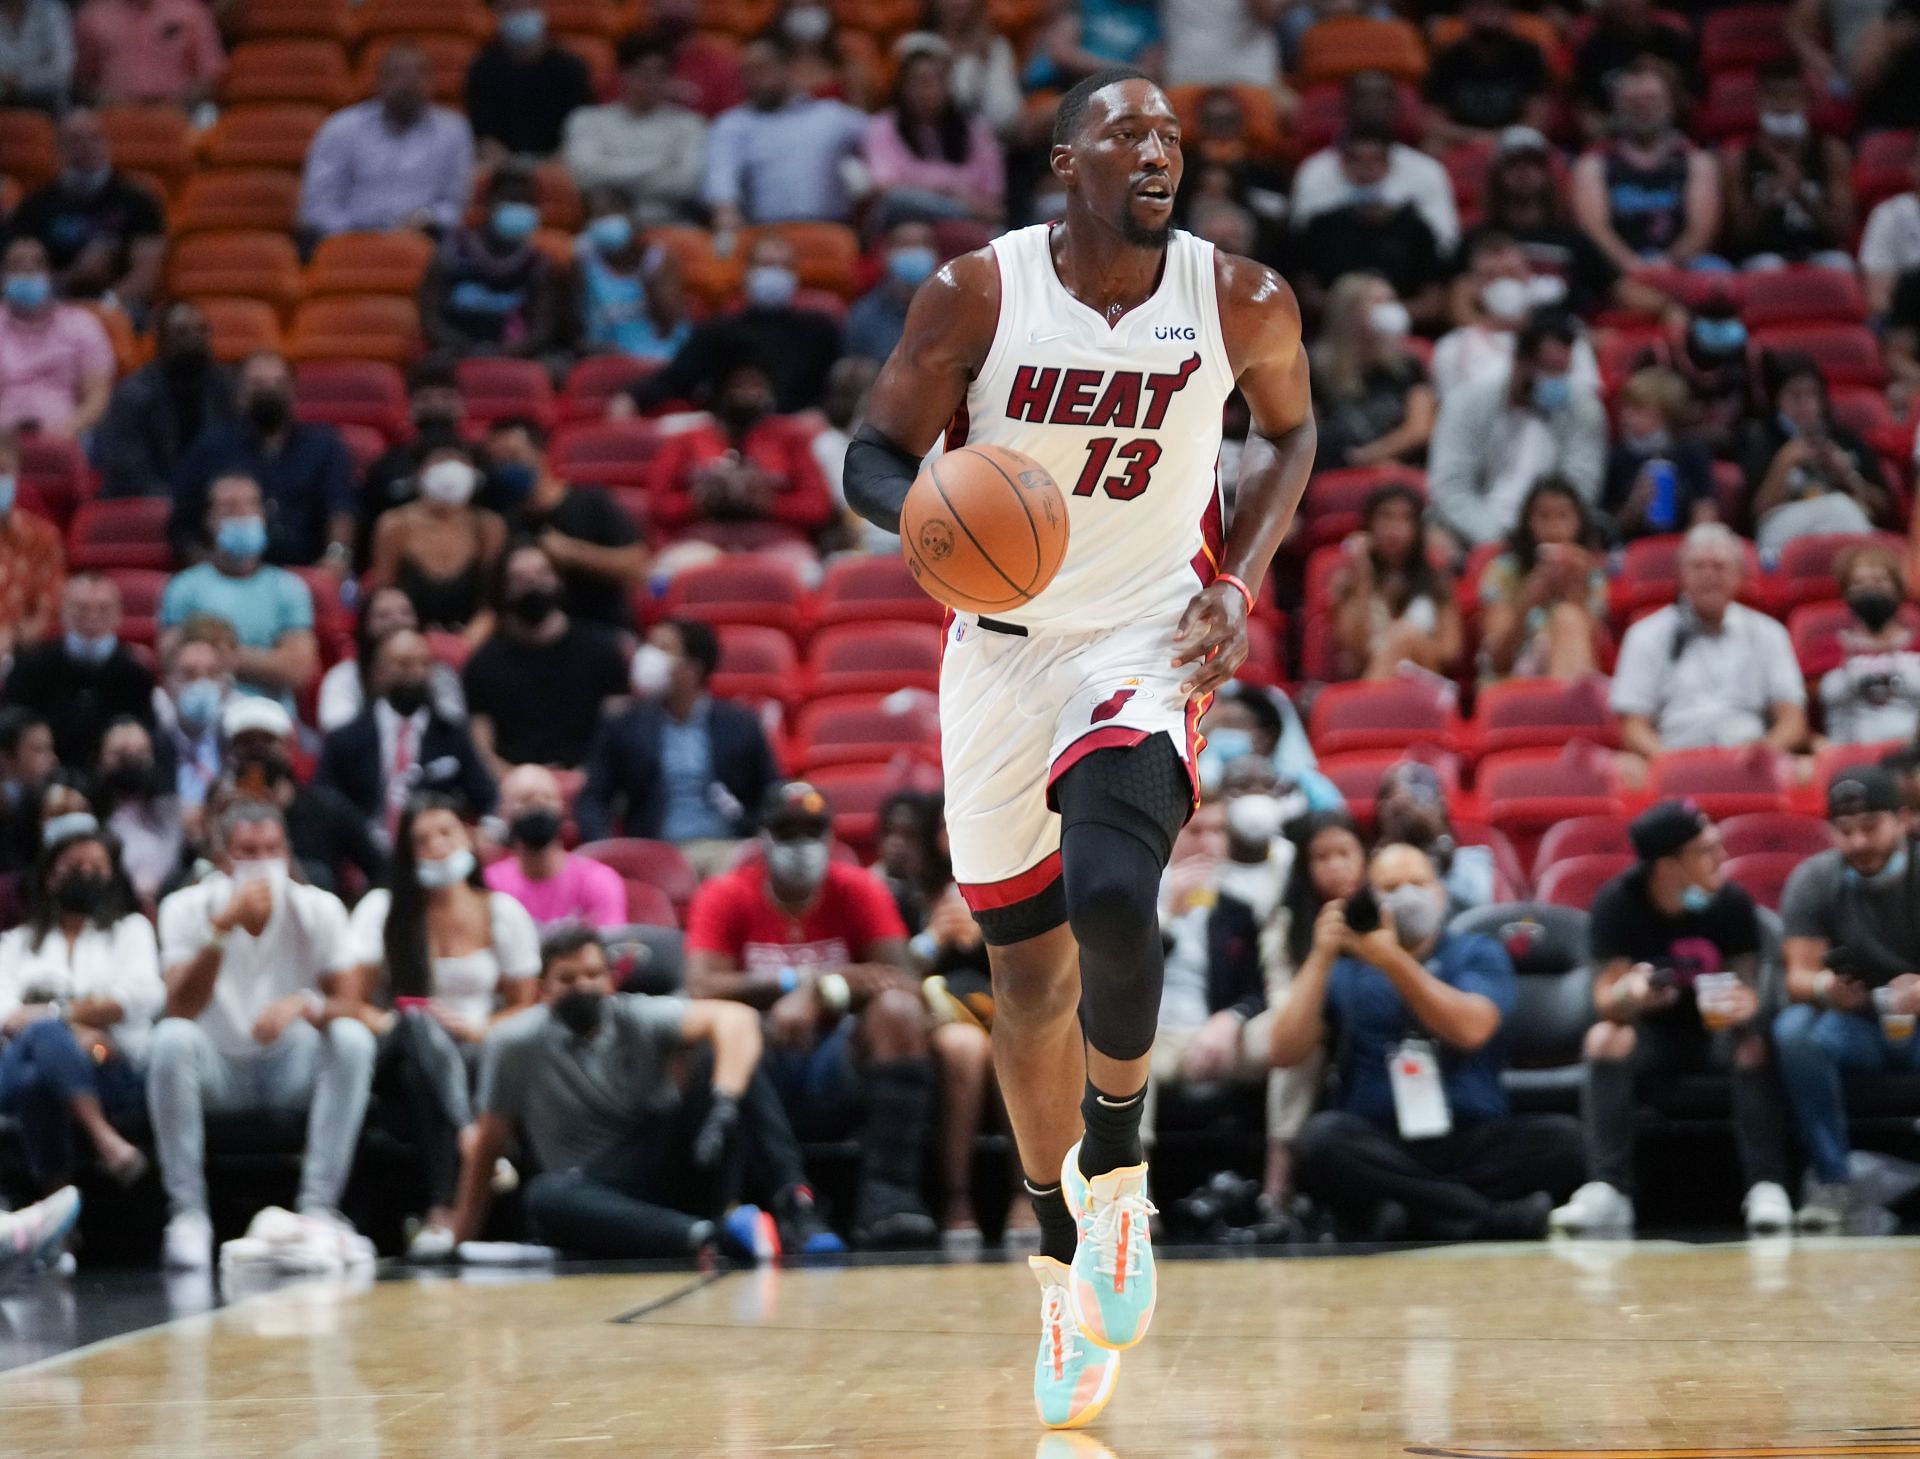 Miami Heat star Bam Adebayo surveying the court in a game